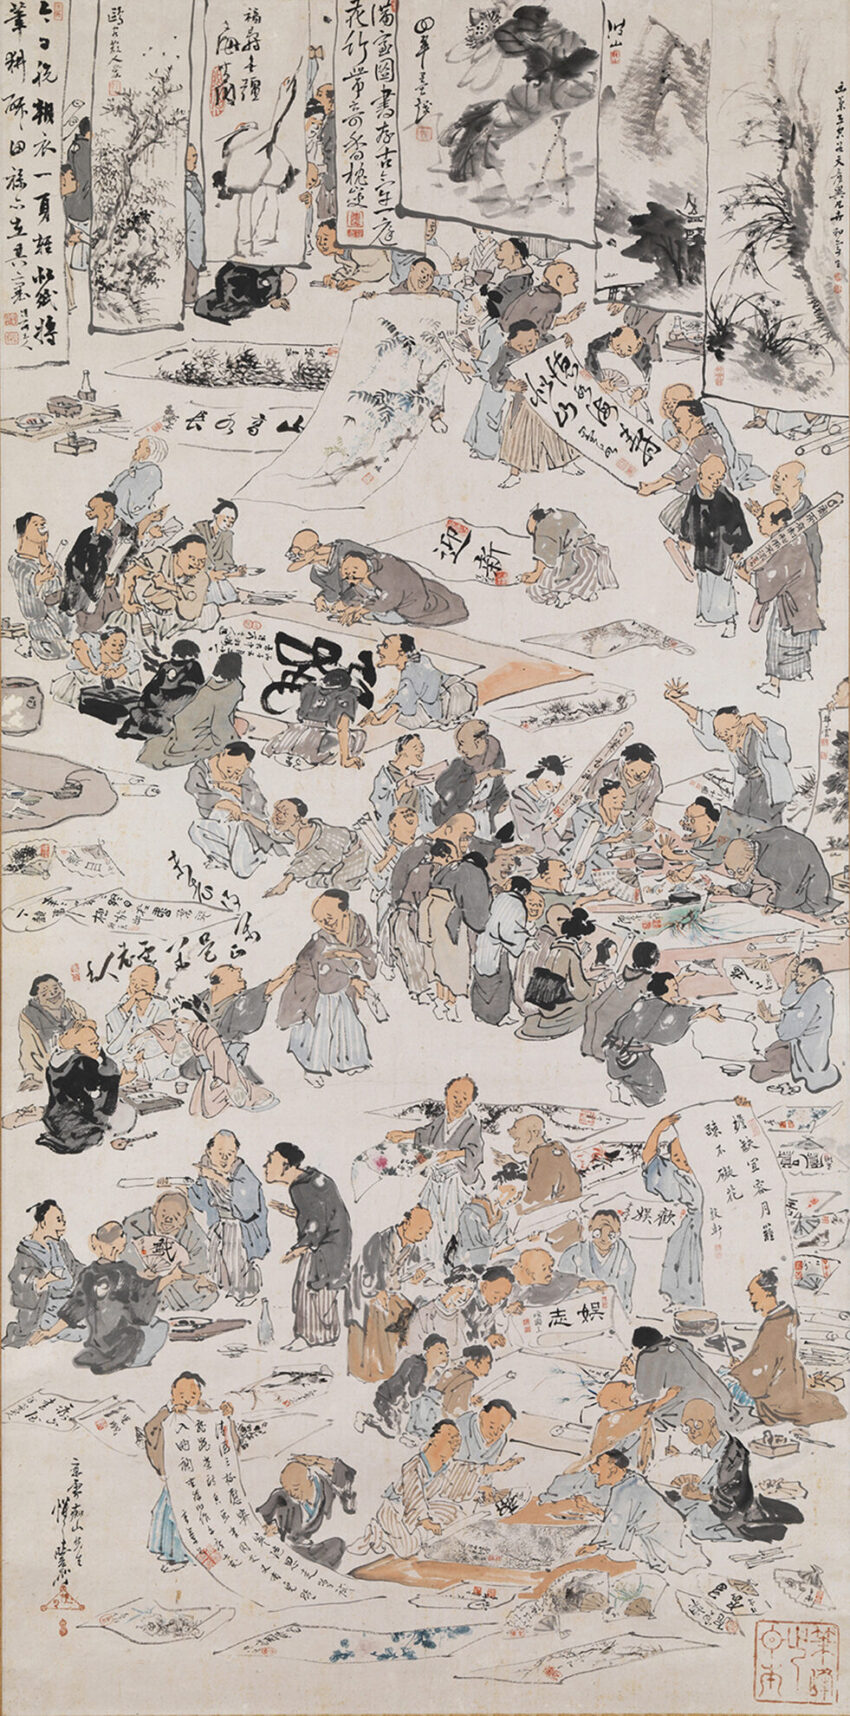 Kawanabe Kyōsai and 54 others, Calligraphy and Painting Party (Shogakai), c. May 1876 – spring 1878. Hanging scroll: ink and light colour on paper, 131.5 × 65.5 cm. Israel Goldman Collection, London. Photo: Ken Adlard